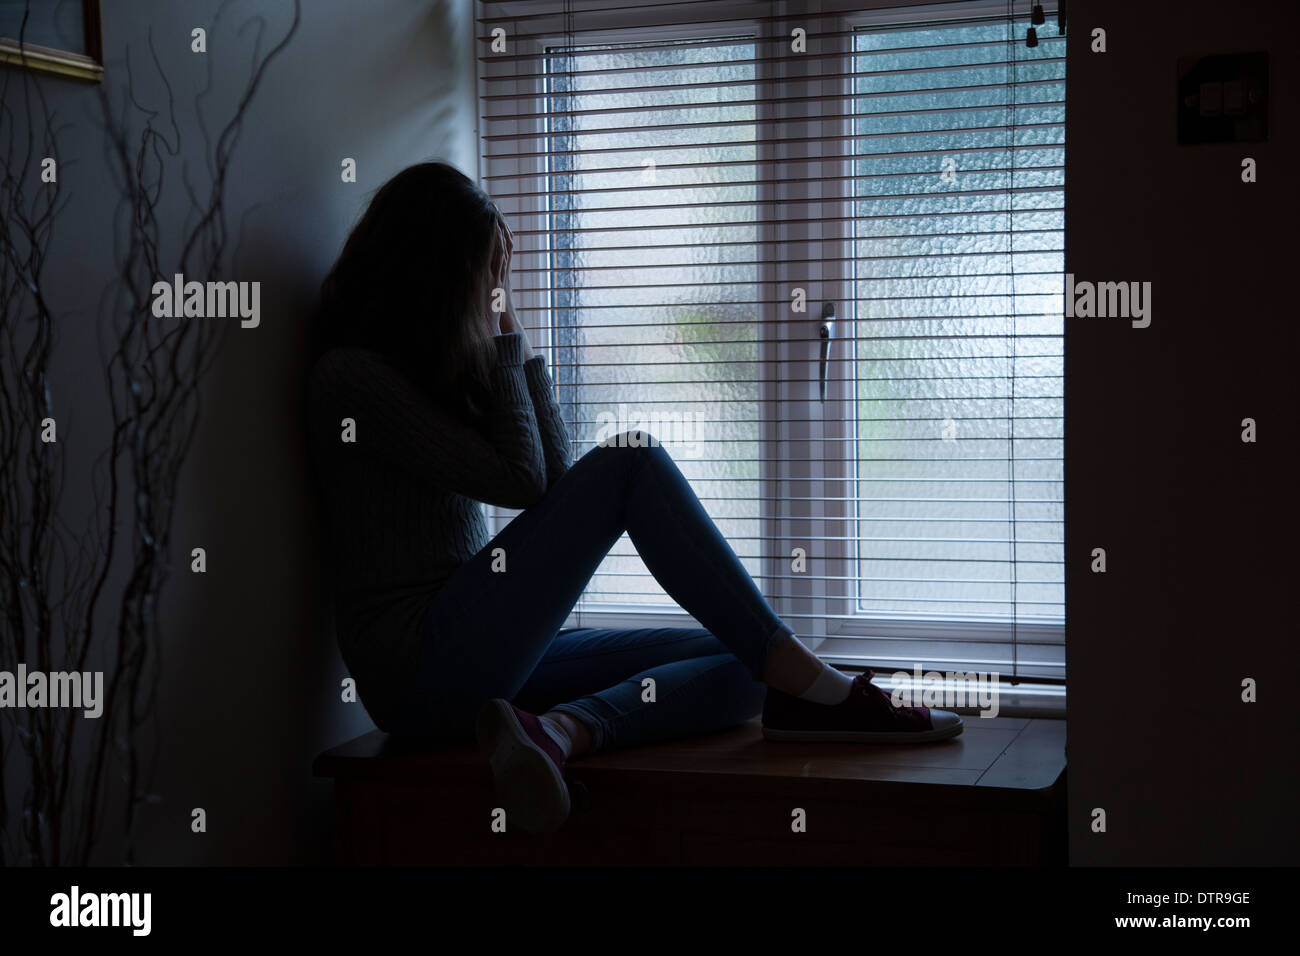 Girl with long hair wearing jeans, hands covering, sitting in darkness by a window at home. Side viewpoint. Stock Photo